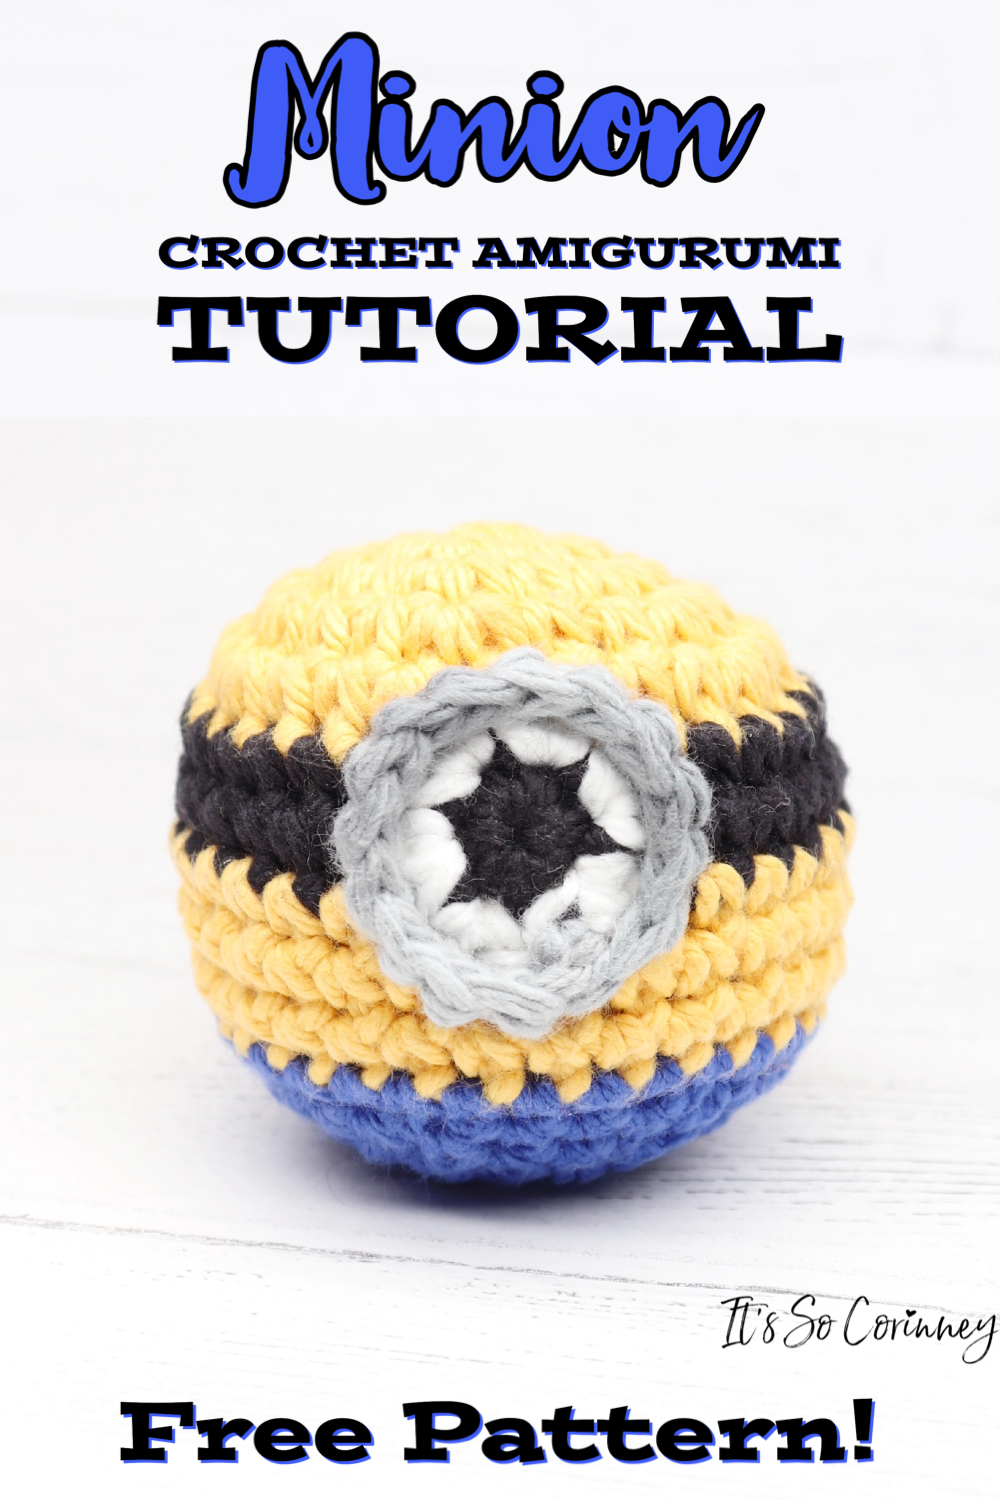 10 crochet stitch marker types and their 10 easy uses in amigurumi in 2023